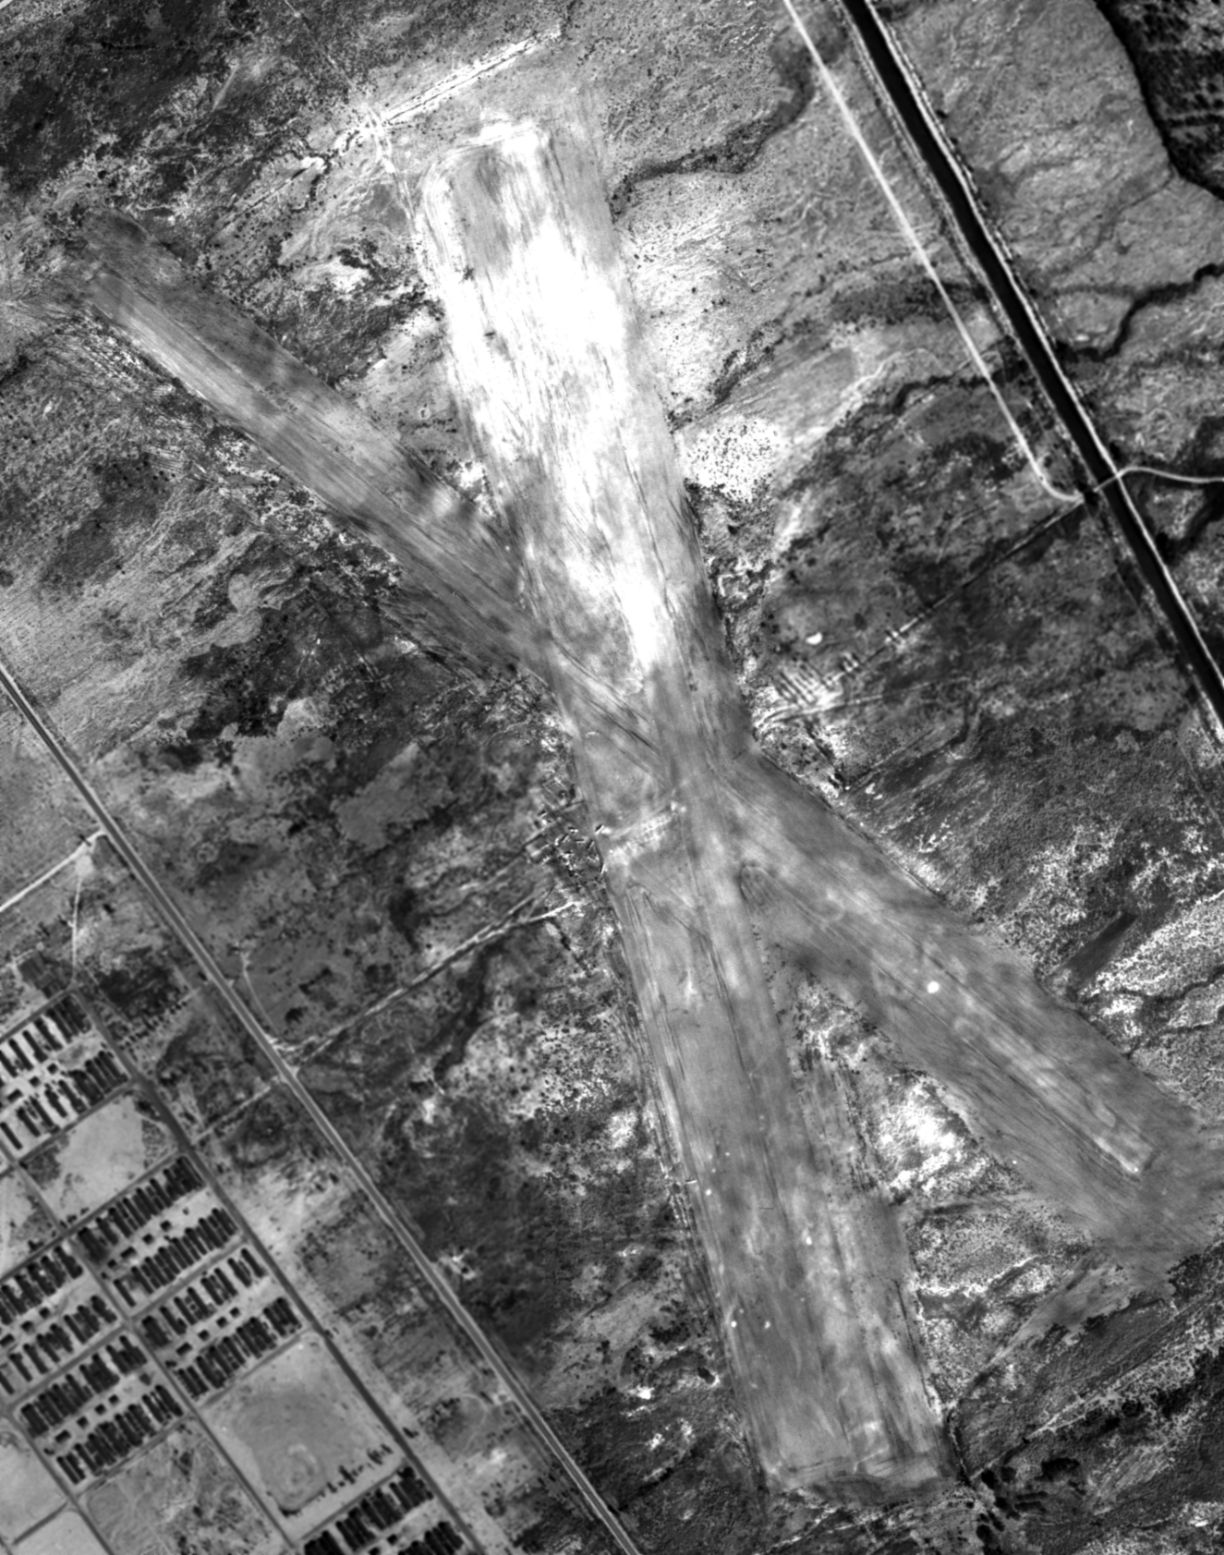 Aerial view of the Manzanar Airstrip, Inyo County, California, United States showing a portion of the Manzanar Relocation Center across the highway, 1 Oct 1944.